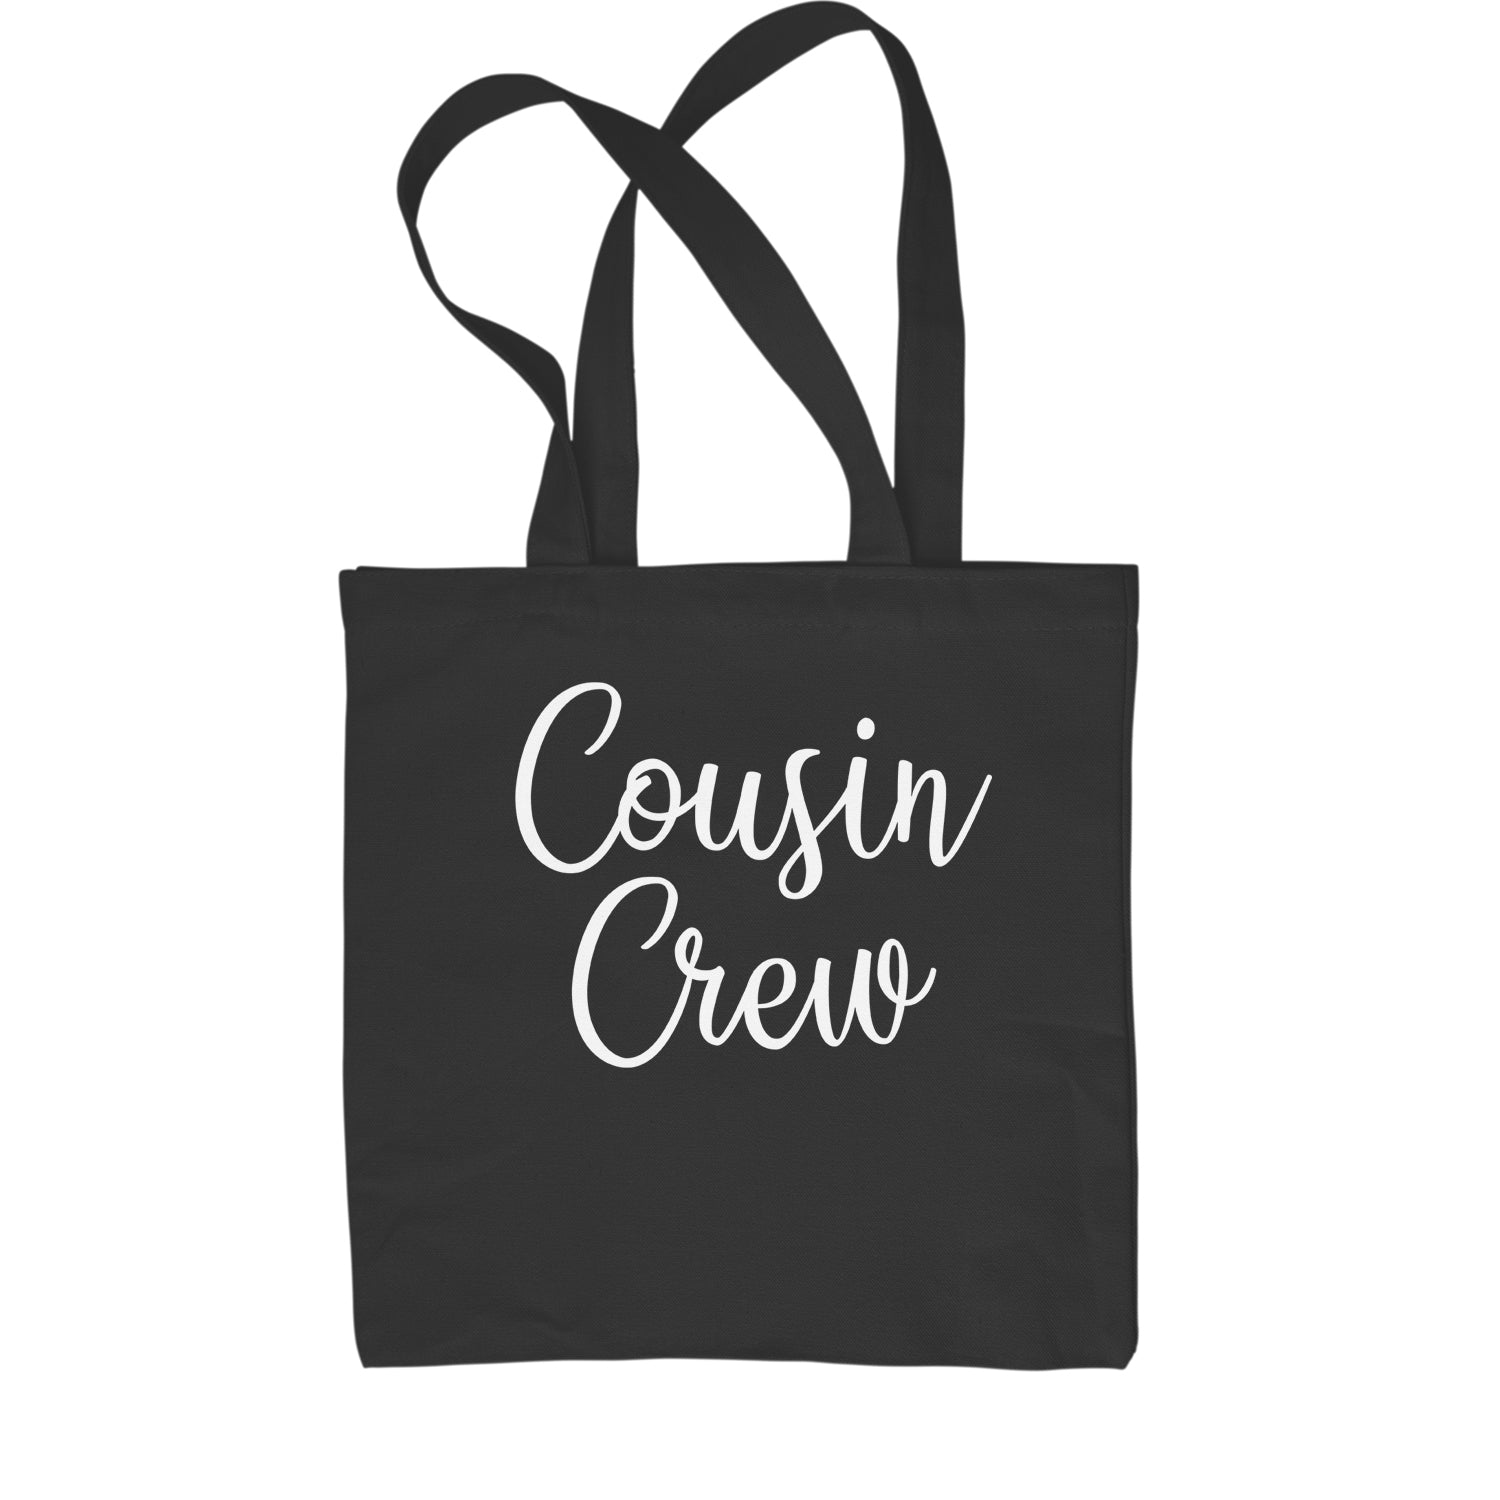 Cousin Crew Fun Family Outfit Shopping Tote Bag barbecue, bbq, cook, family, out, reunion by Expression Tees